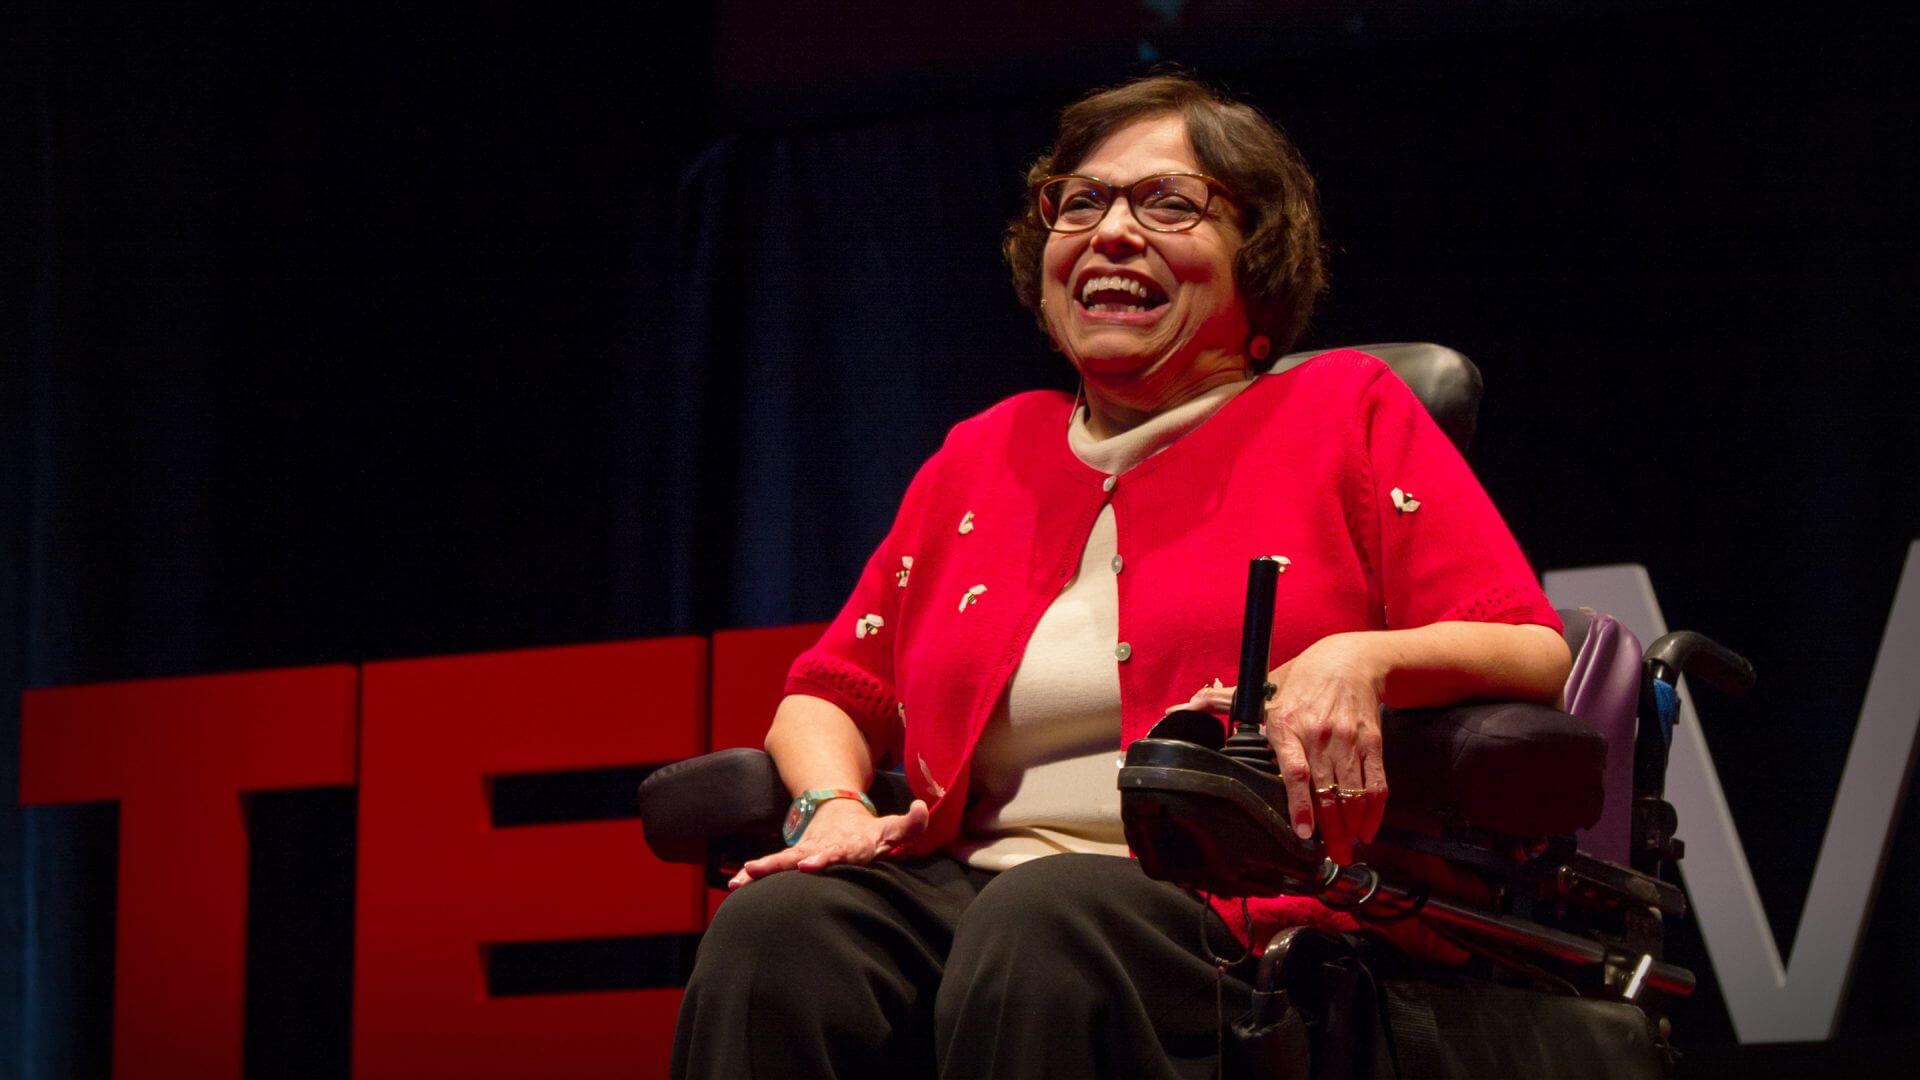 Judy Heumann at her TED Talk with the TED sign behind her.